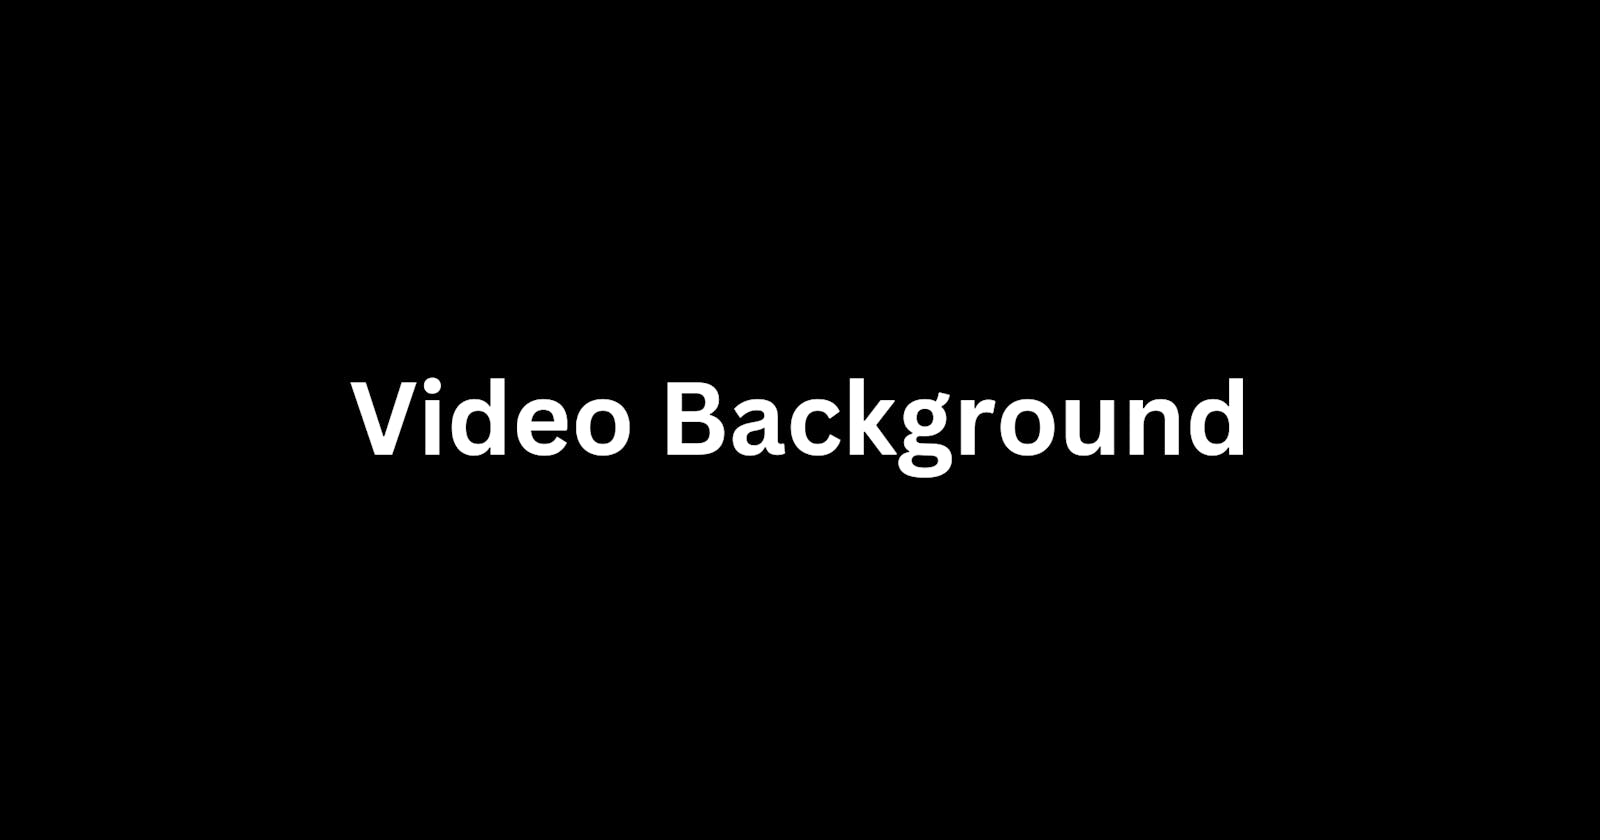 How to Create a Video Background with HTML and CSS